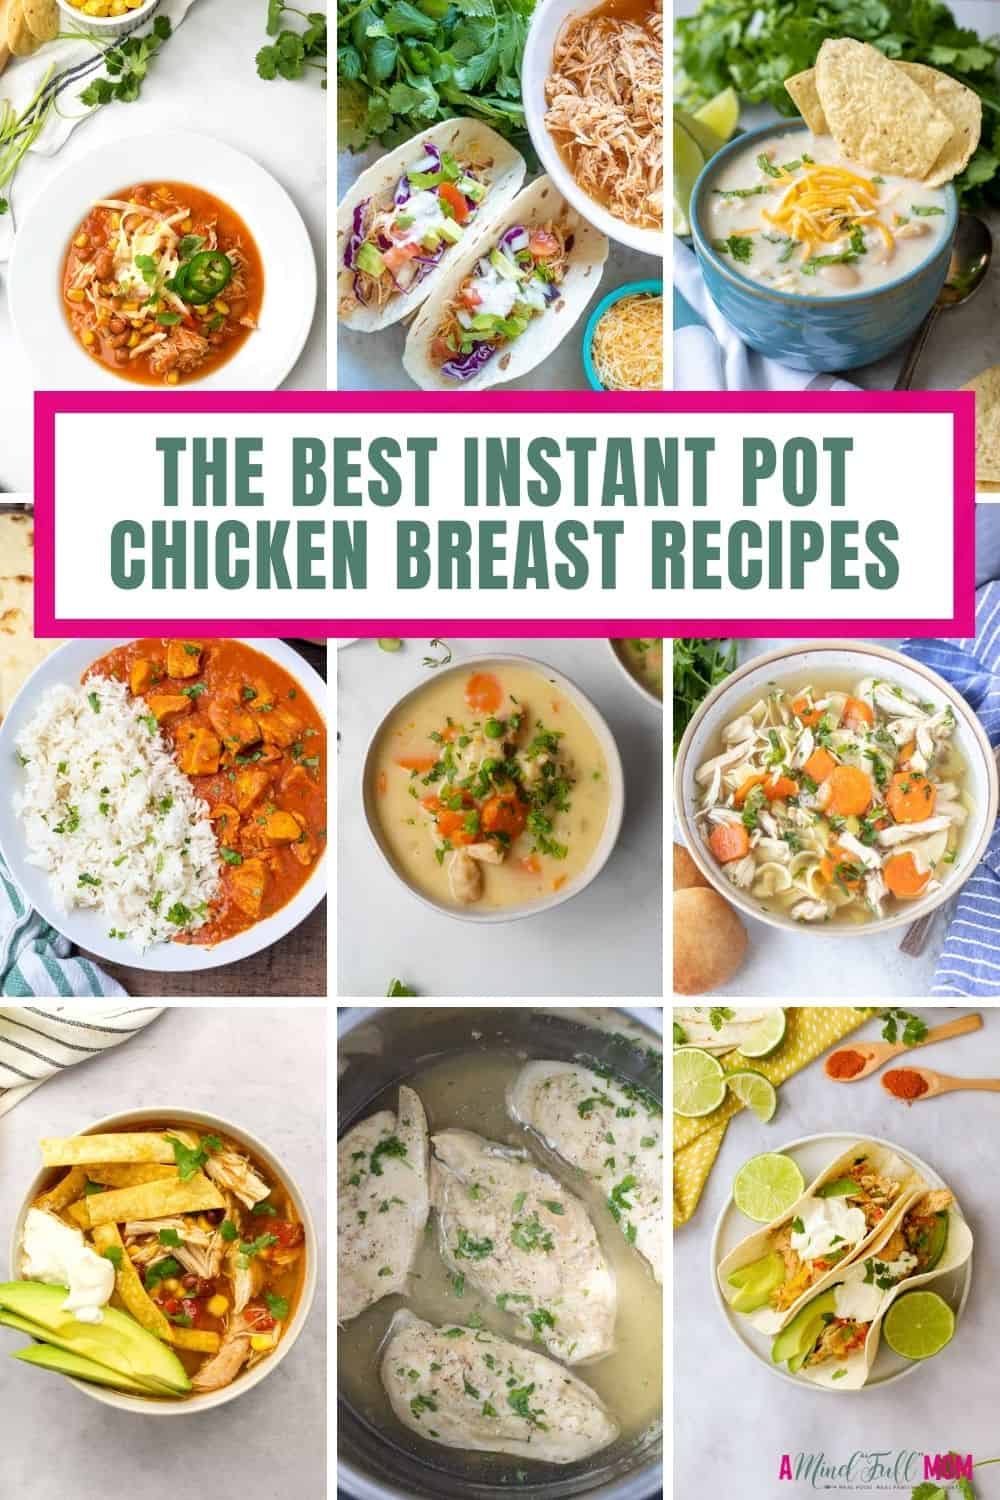 The Best Instant Pot Chicken Breast Recipes - Over 20 Recipes